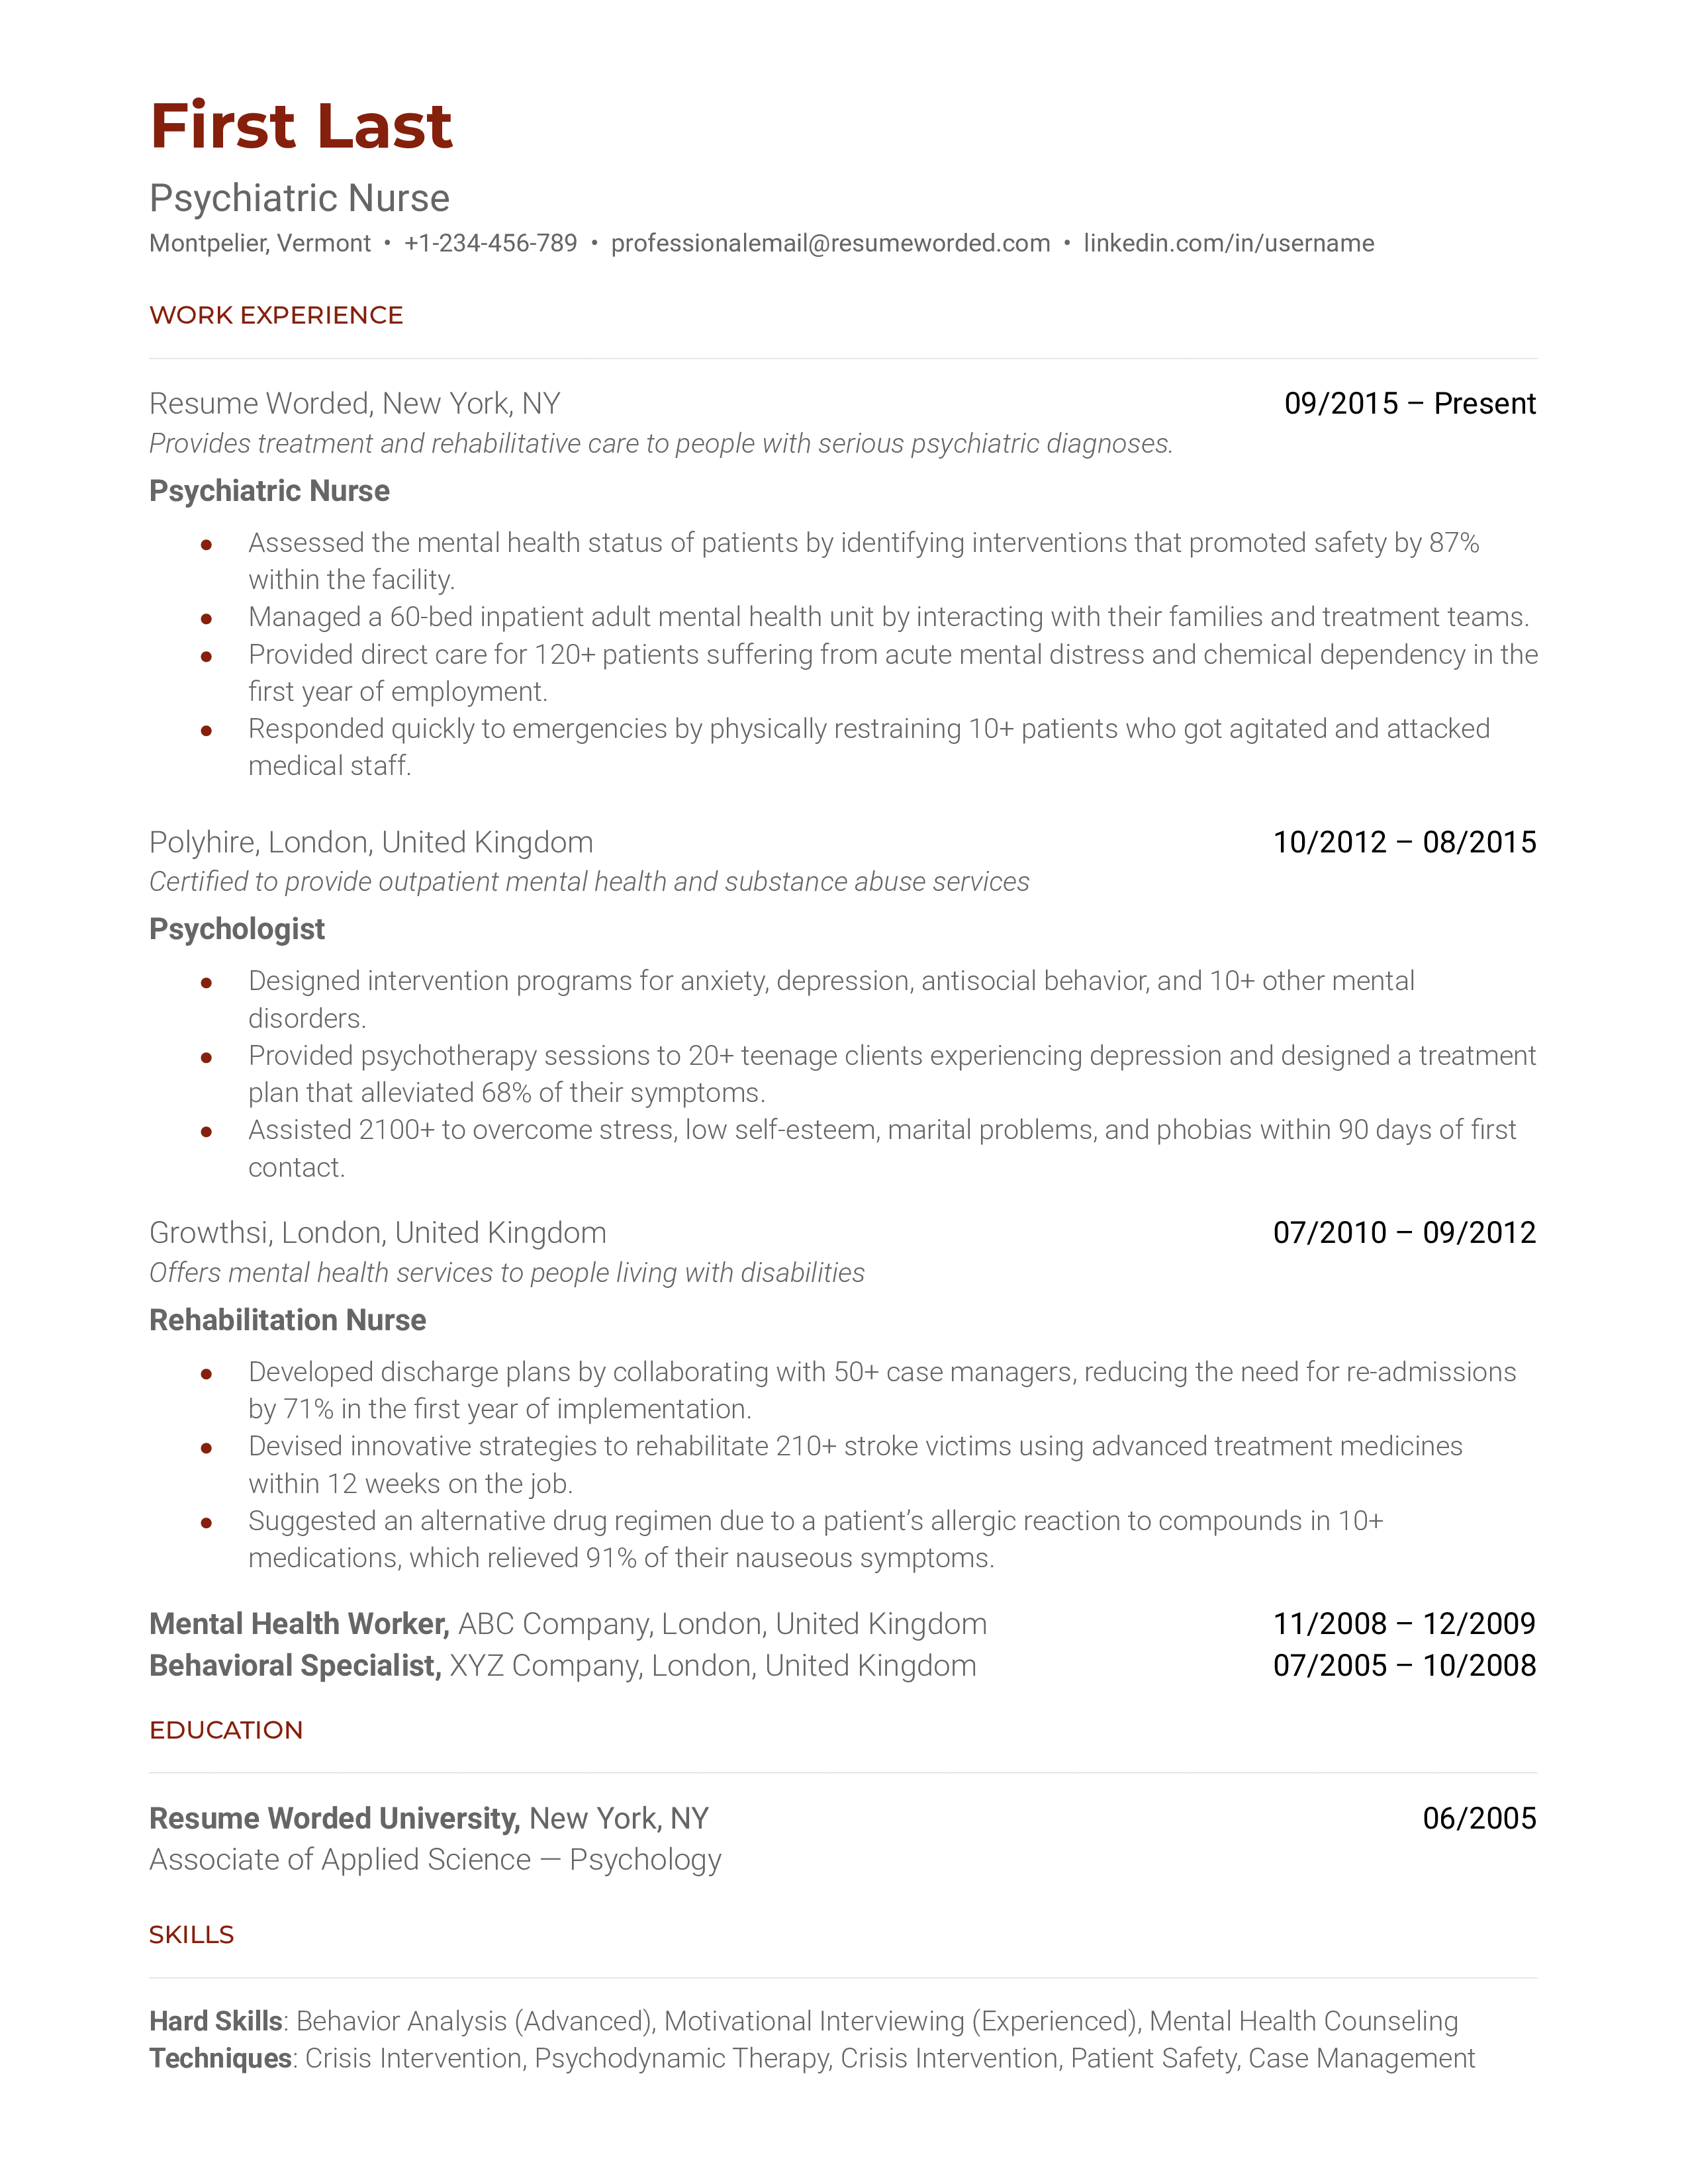 A resume for a psychiatric nurse with a degree in psychatric & mental health, and prior experience as a nursing assistant.